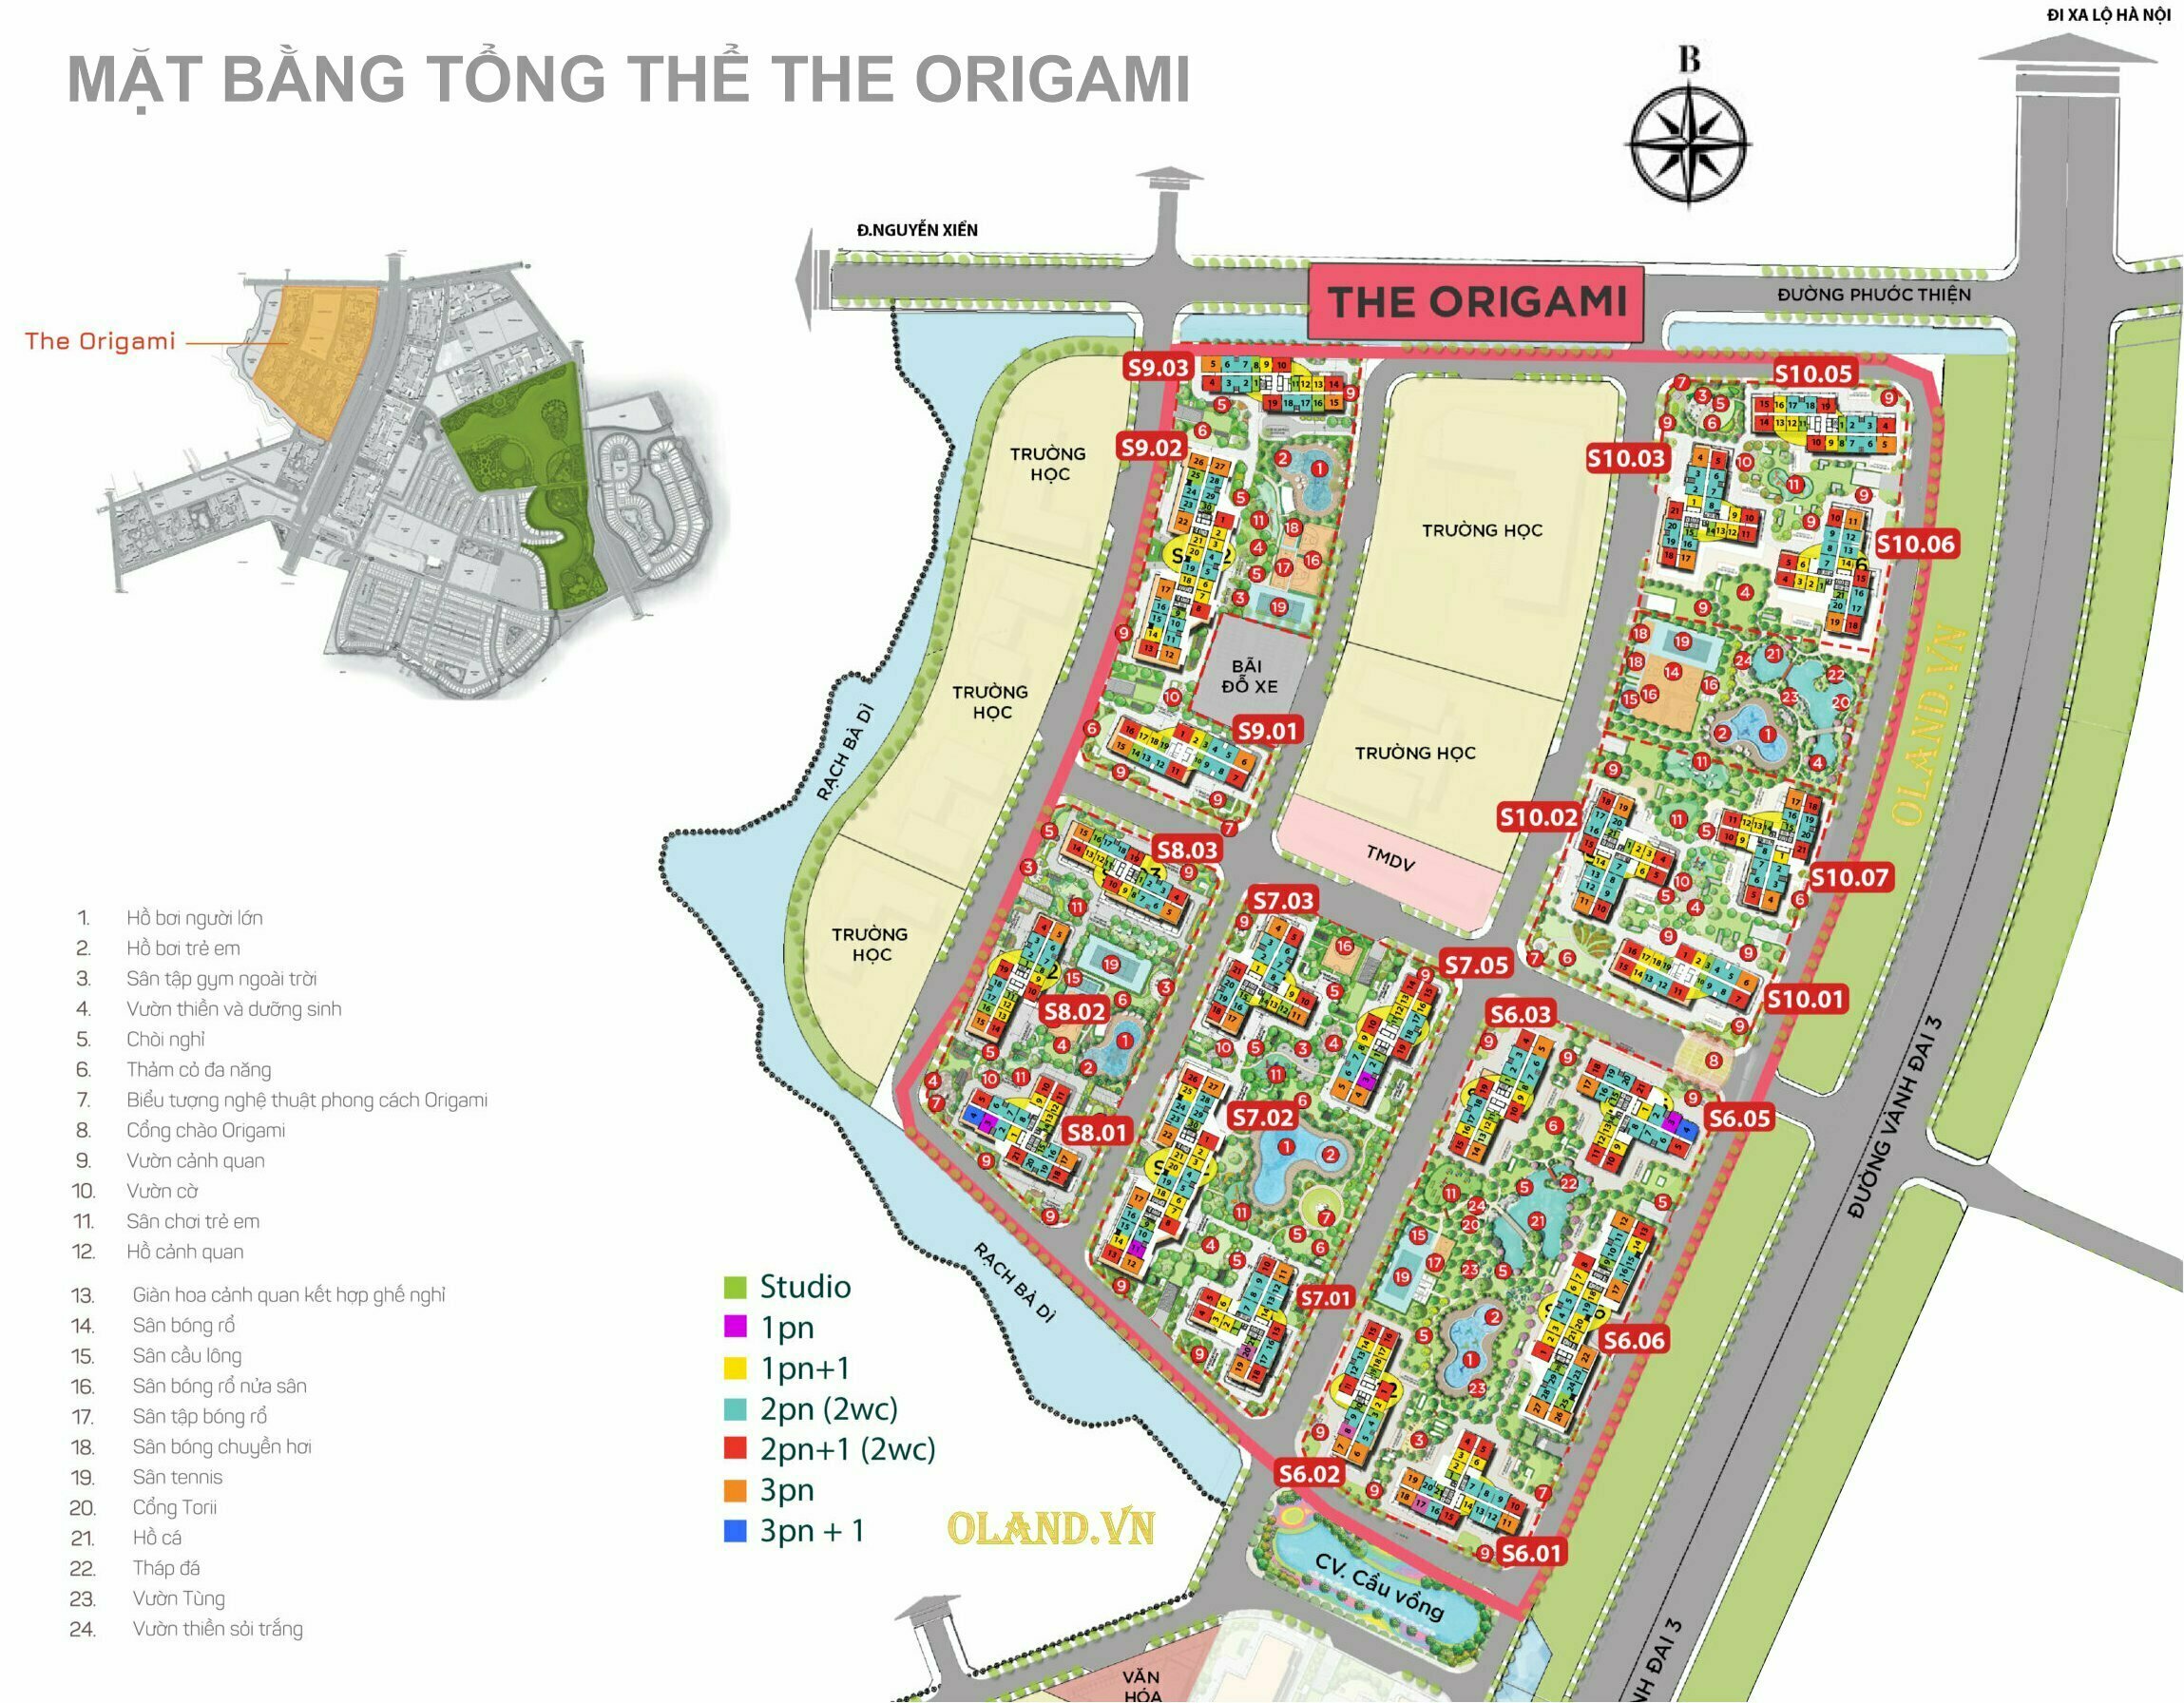 master layout (mặt bằng tổng thể) the Origami vinhomes - Oland